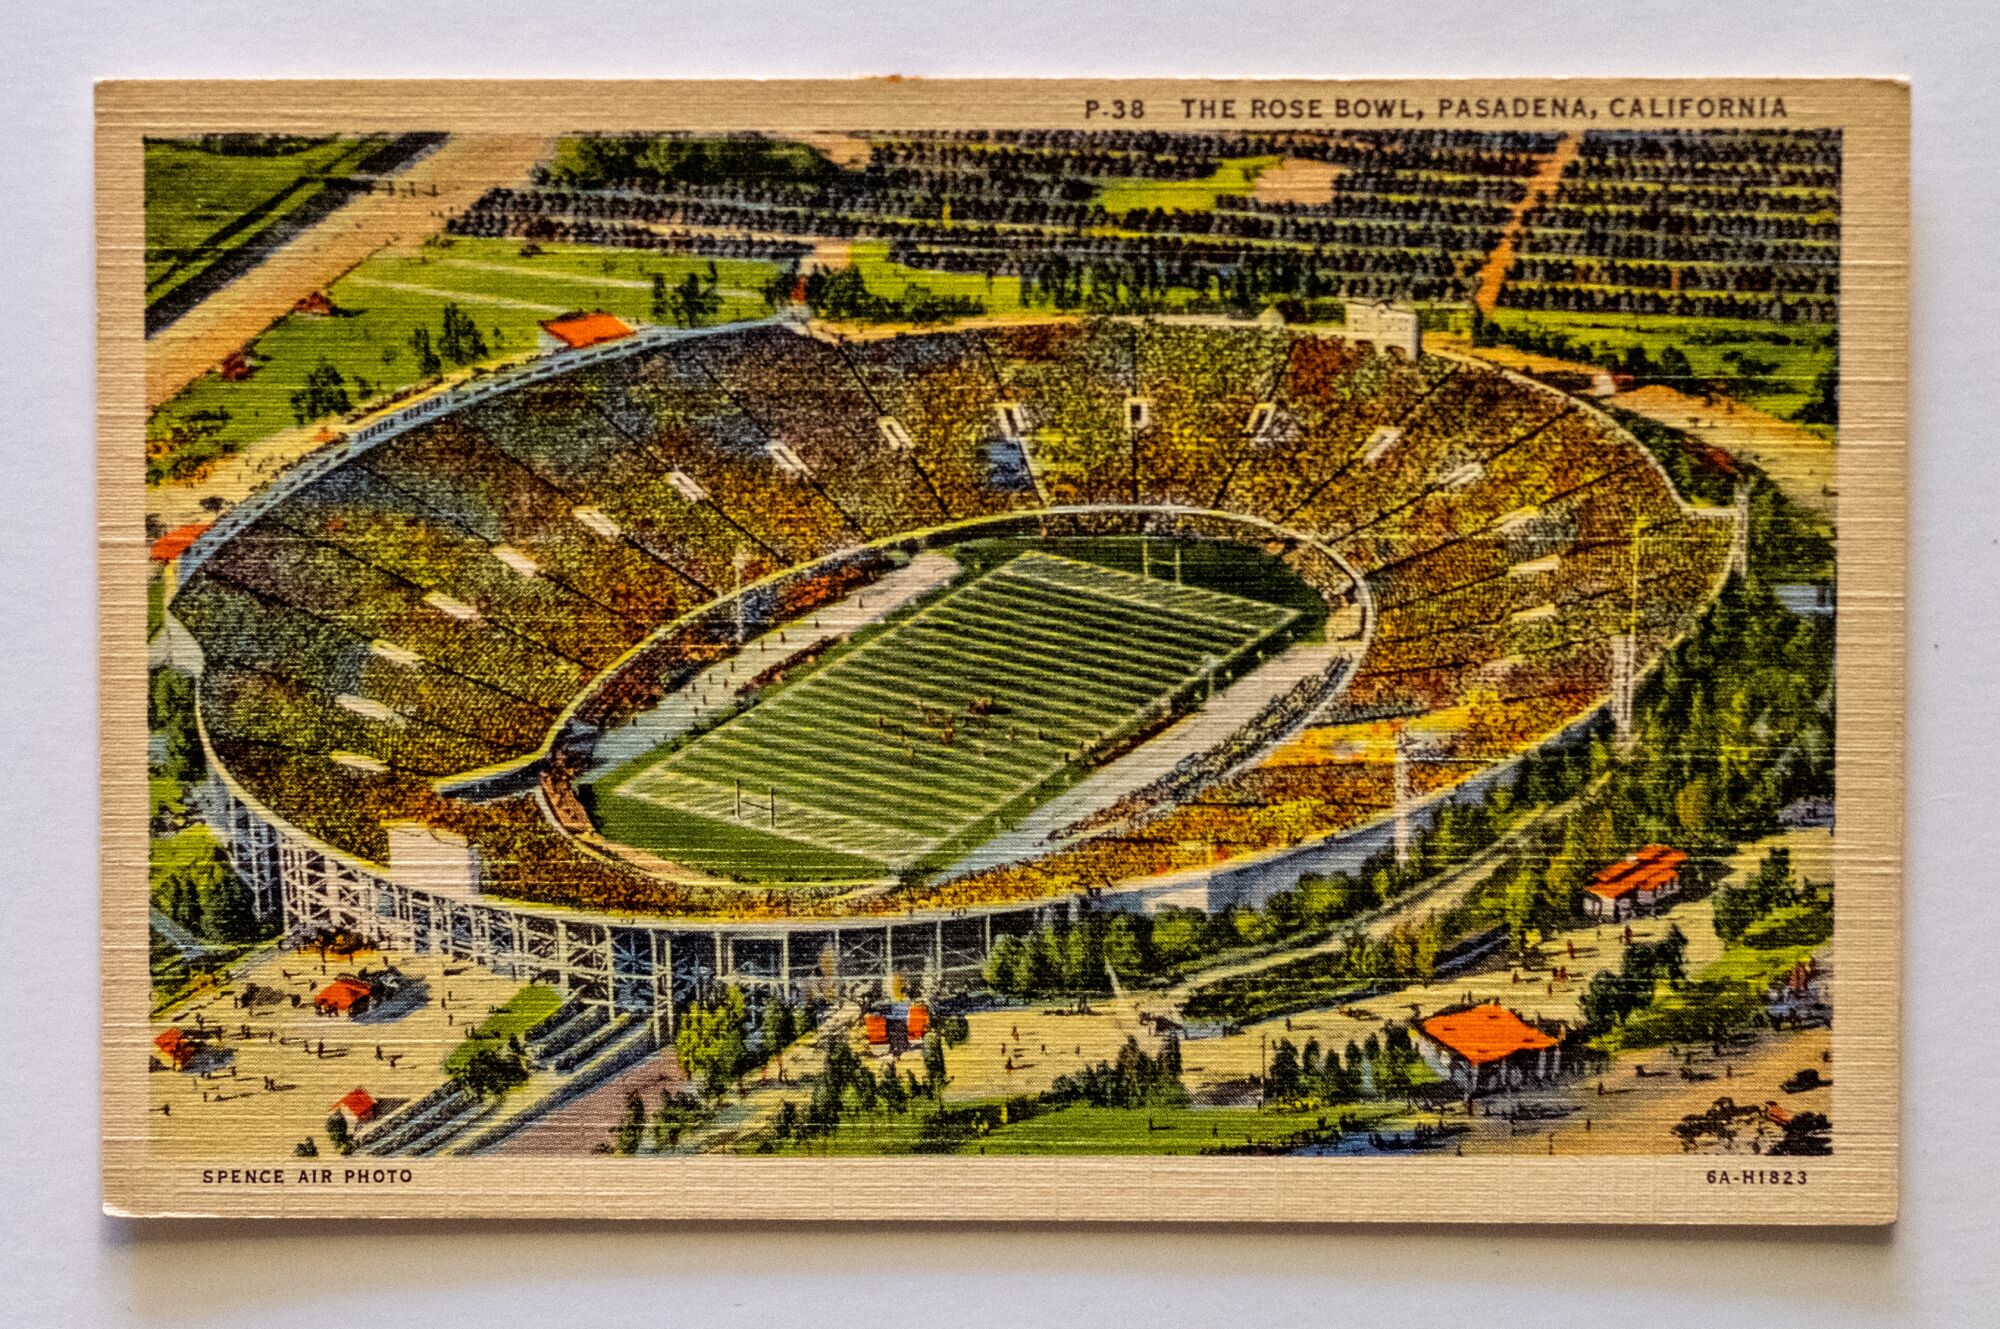 A postcard featuring a colorized sketch of the Rose Bowl